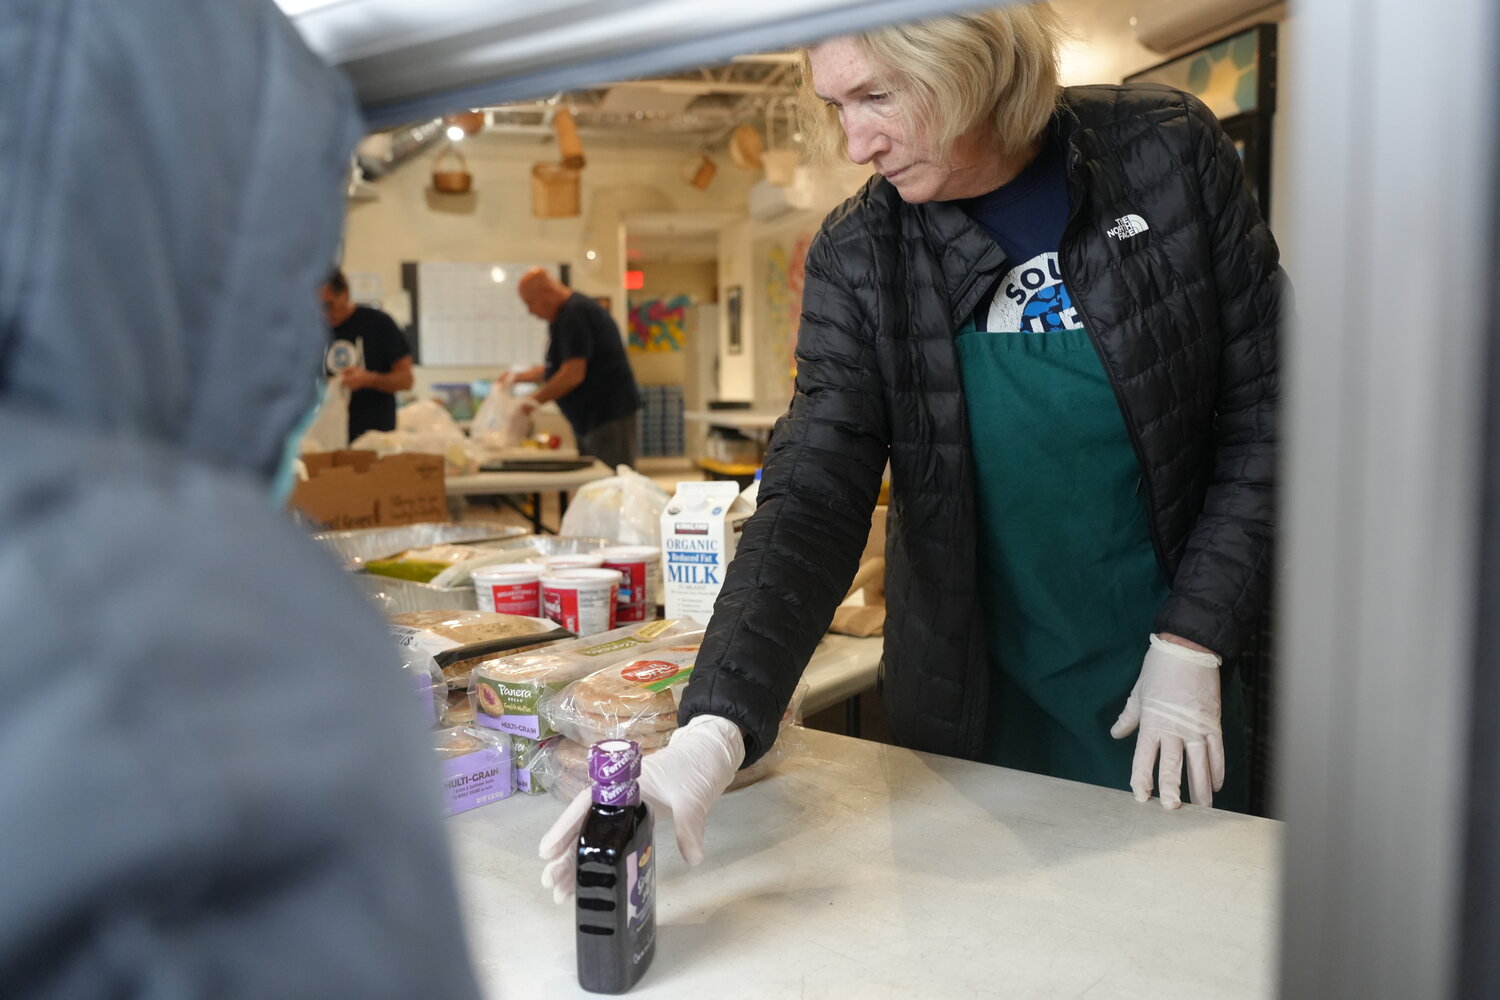 Volunteer Eilleen Heneghan handing out groceries at the Long Beach Soup Kitchen’s weekly pantry.